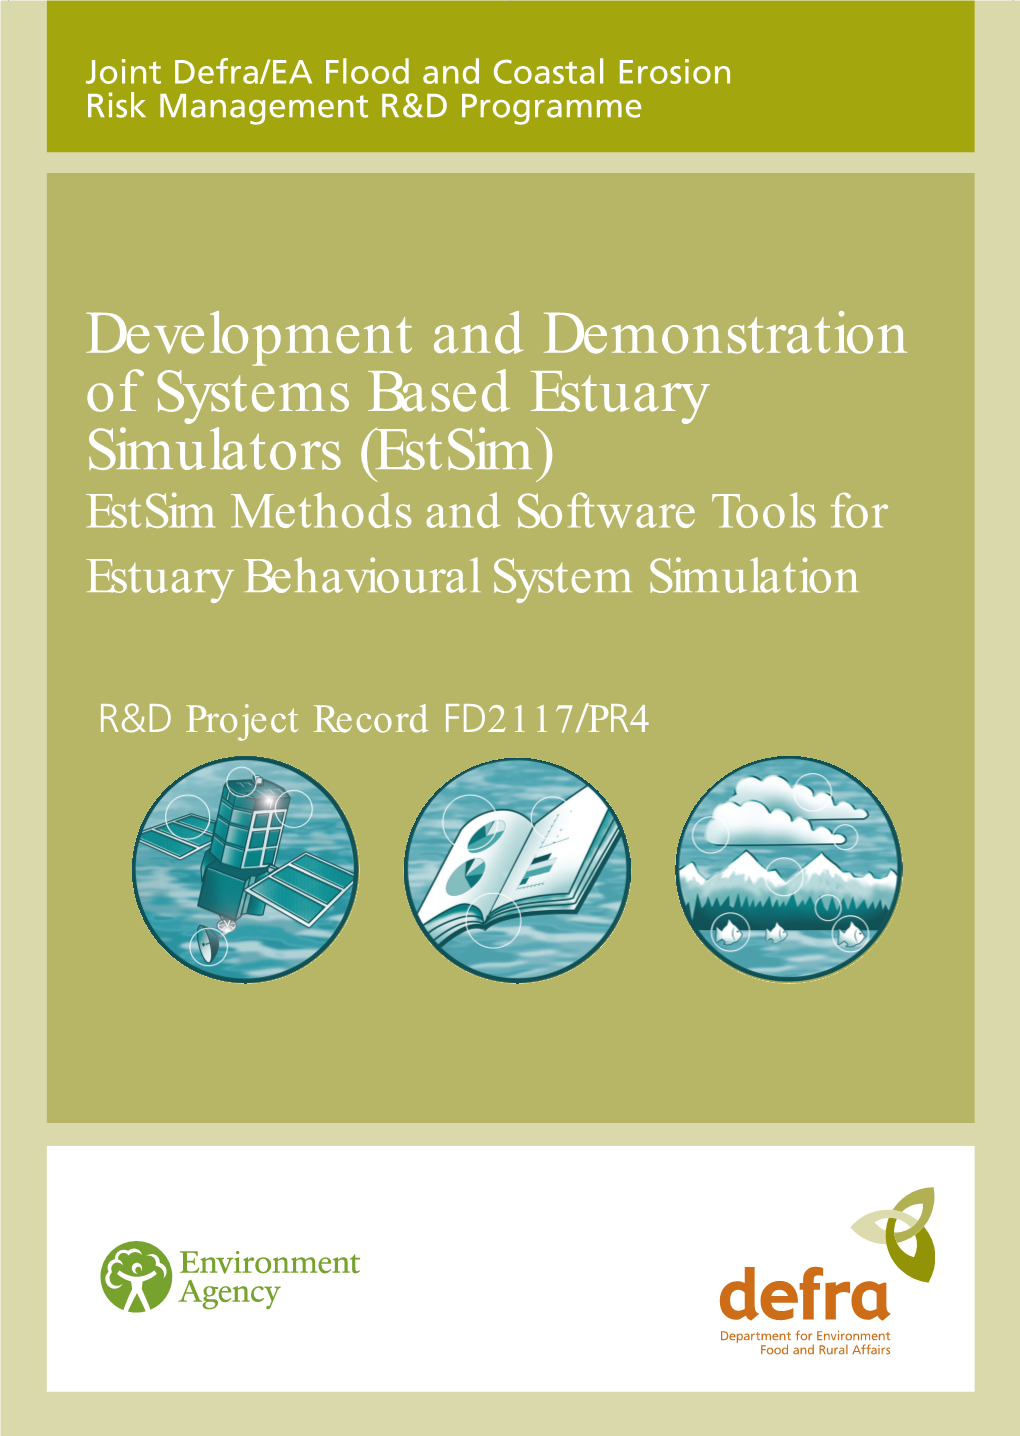 Methods and Software Tools for Estuary Behavioural System Simulation